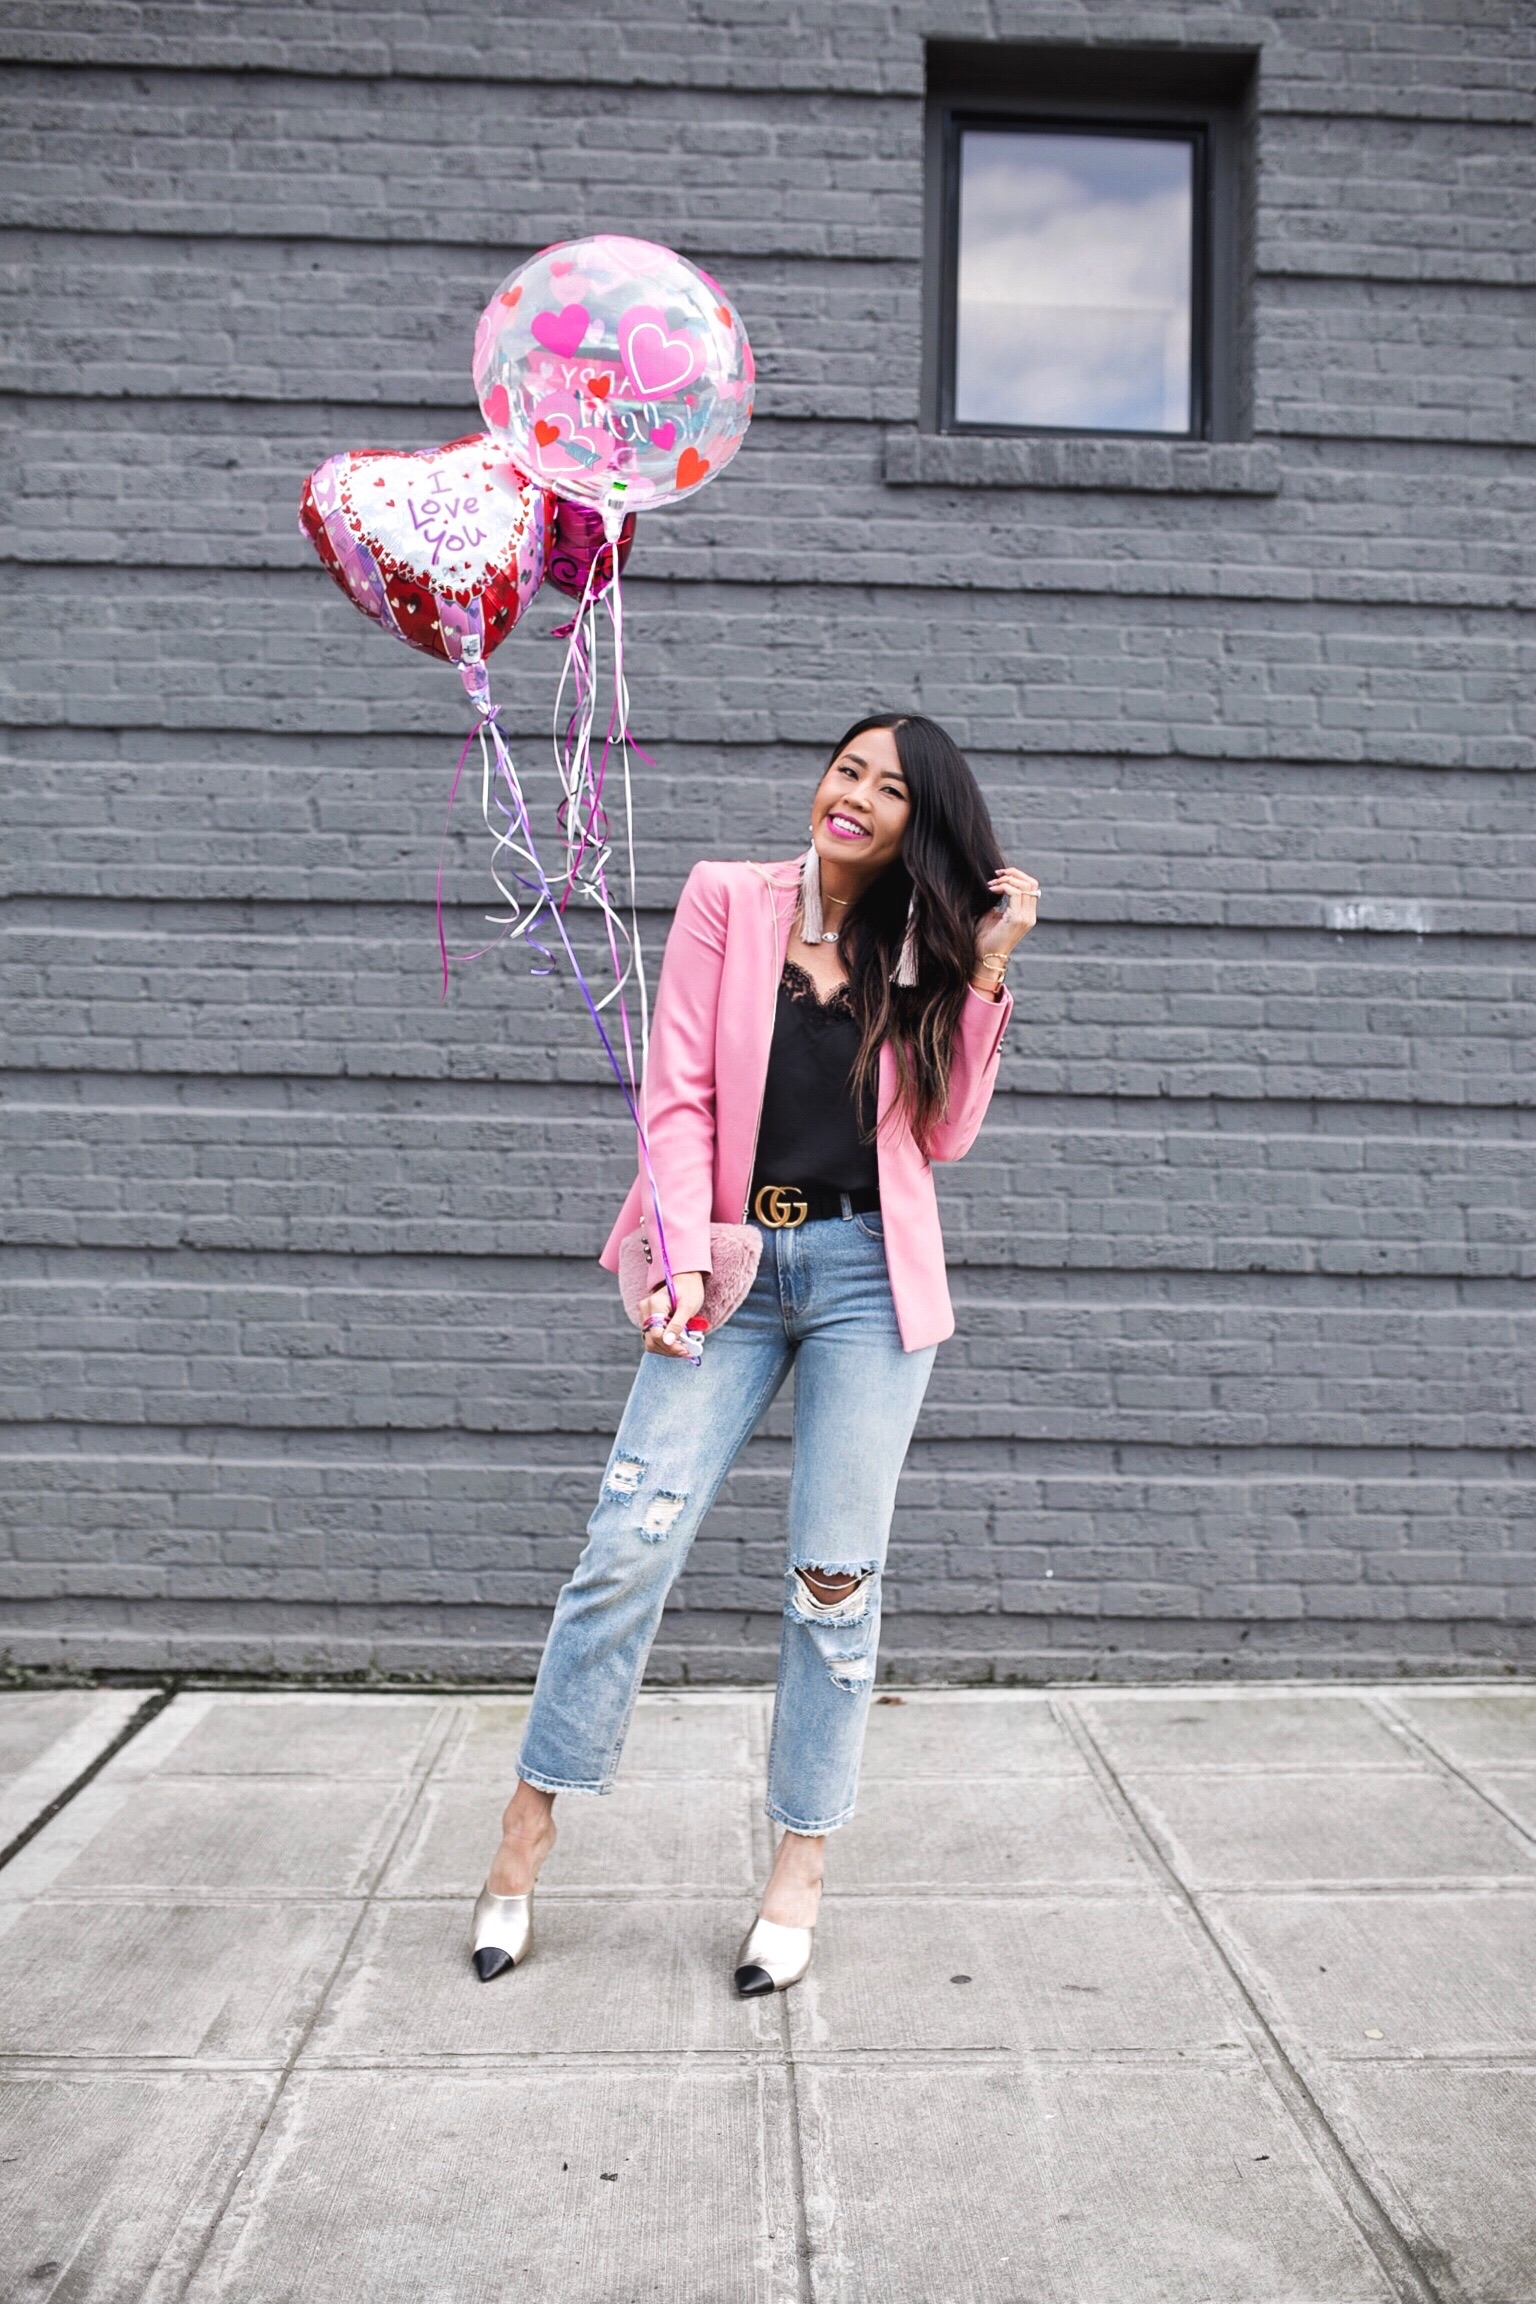 Chic cute valentines day outfits